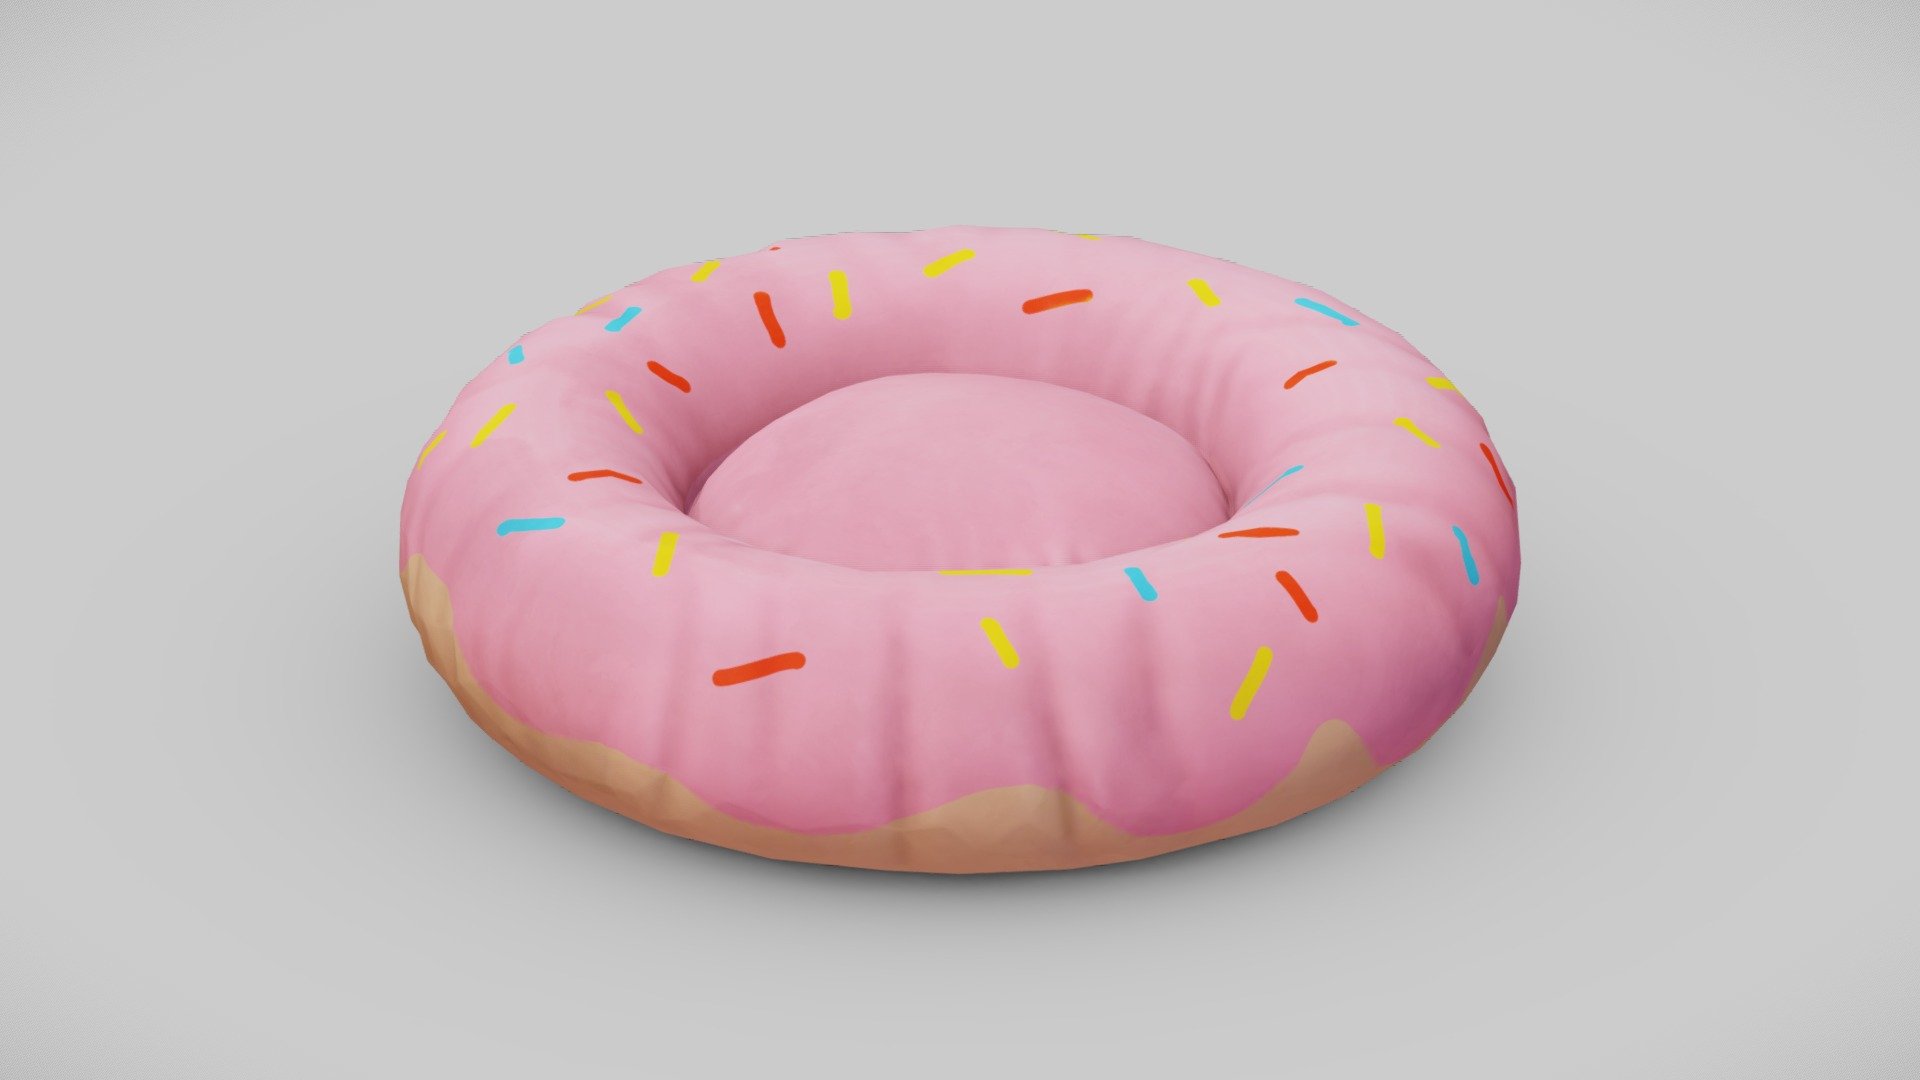 donut pet bed for your renders and games

Textures:

Diffuse color, Roughness, Normal

All textures are 4K

Files Formats:

Blend

FBX

Obj - donut pet bed - Buy Royalty Free 3D model by Vanessa Araújo (@vanessa3d) 3d model